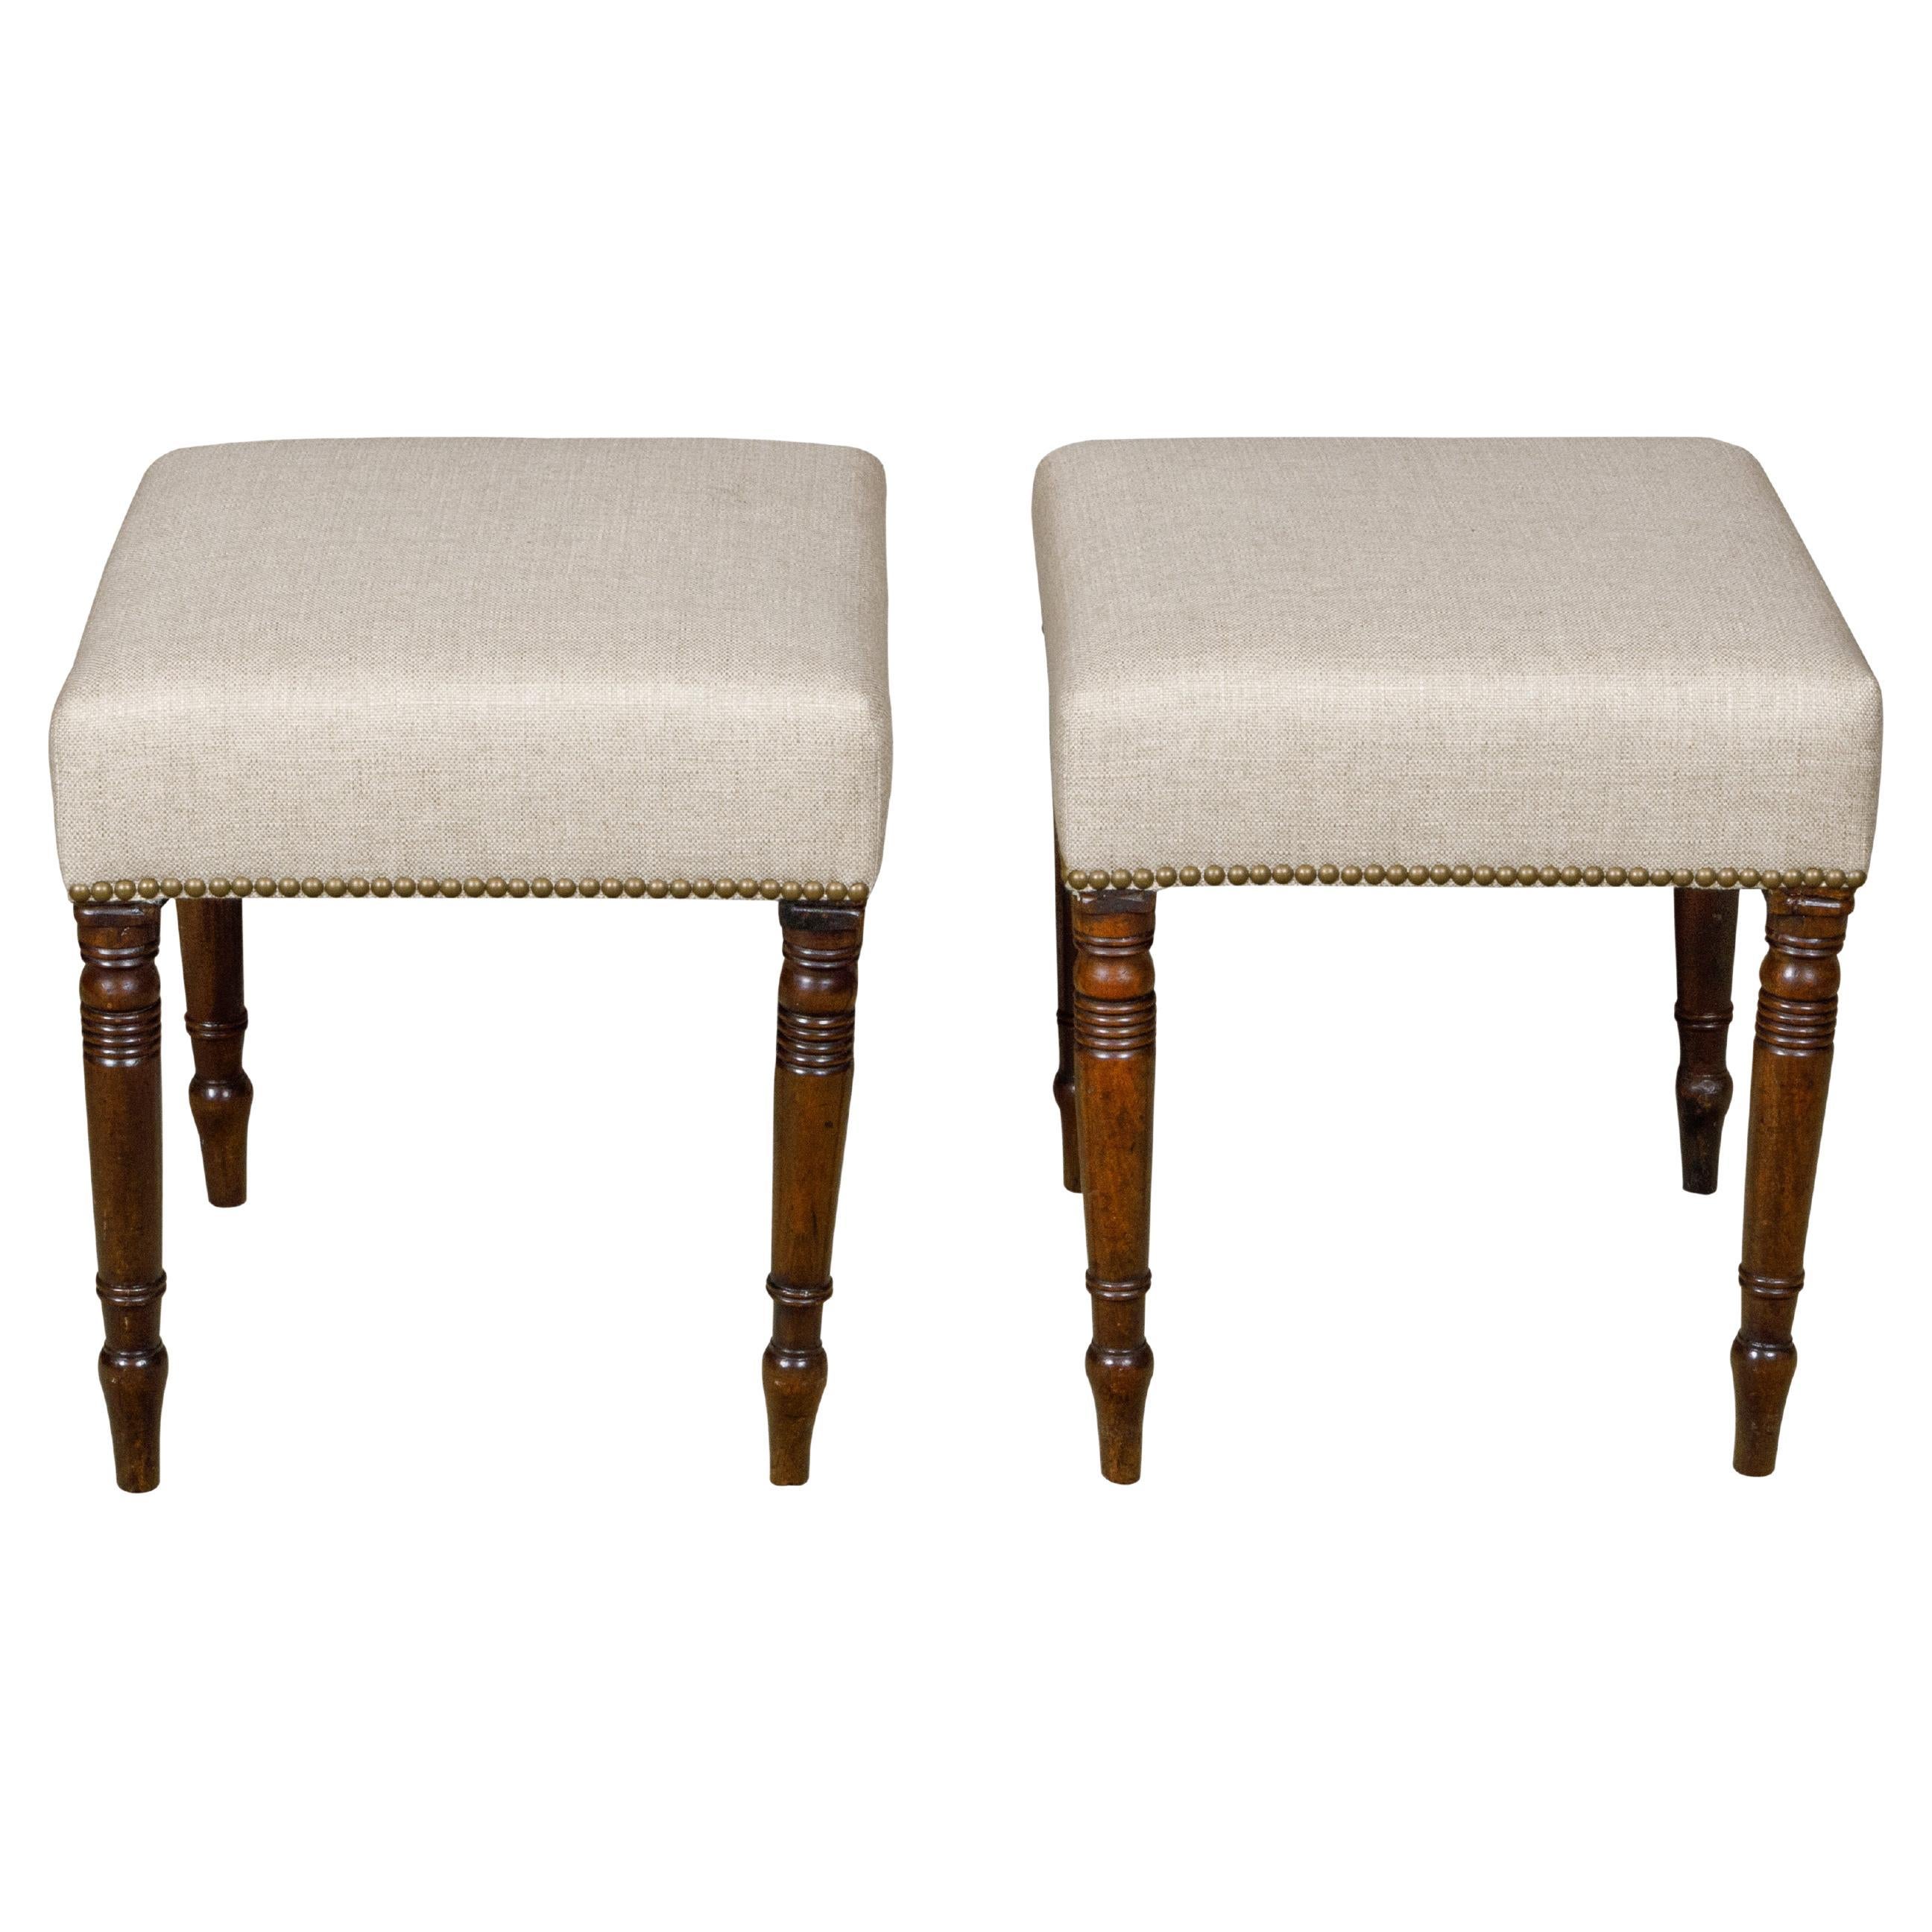 Pair of English Regency 19th Century Mahogany Stools with Turned Spindle Legs For Sale